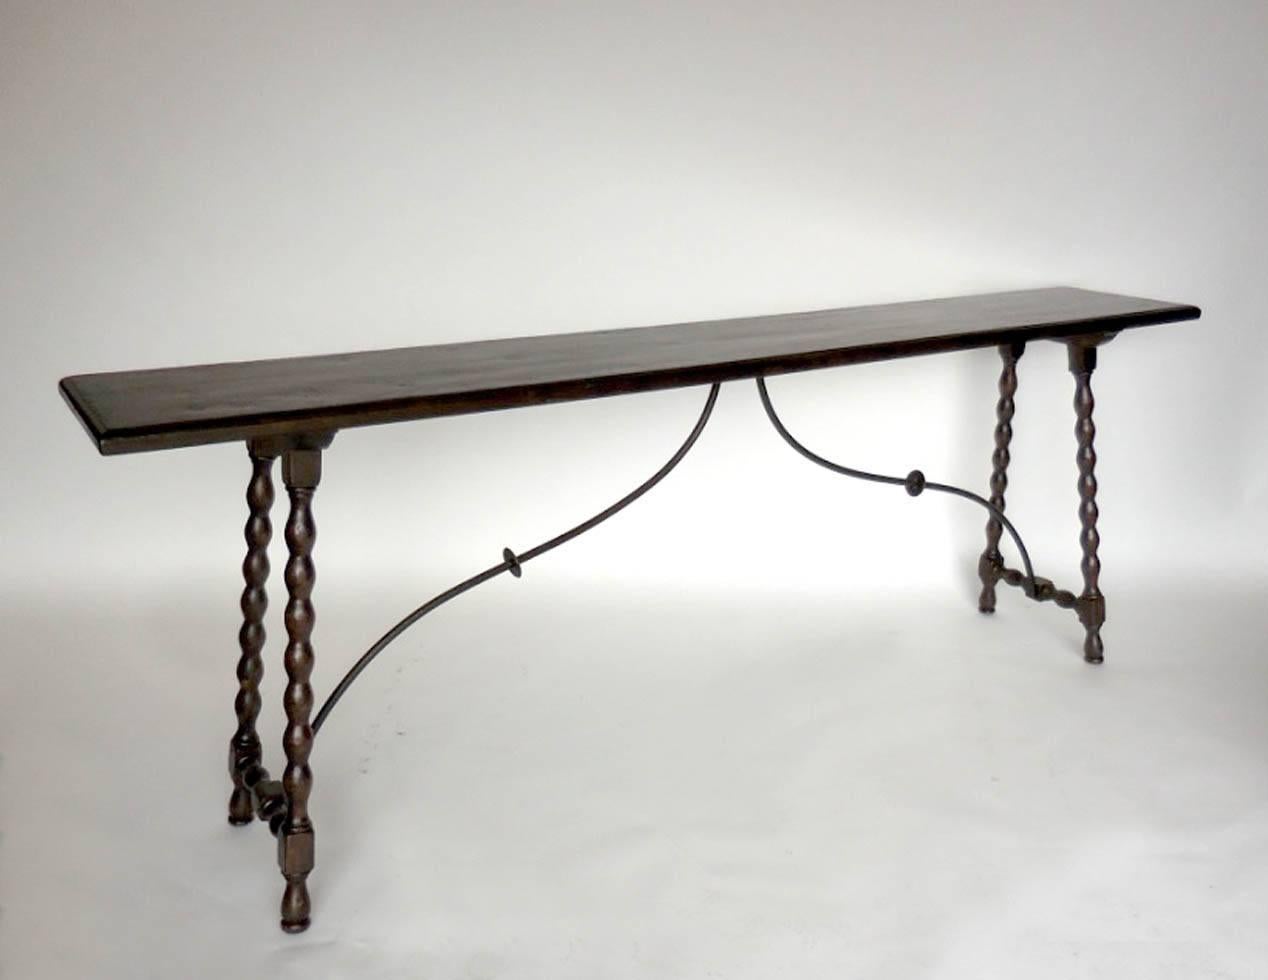 Custom walnut bobbin console with iron supports. Thin, gracious profile. Can be made in custom sizes and finishes. Can be made in any size and finish, in oak, mahogany or walnut. Made in Los Angeles by Dos Gallos Studio.  
PRICES ARE SUBJECT TO